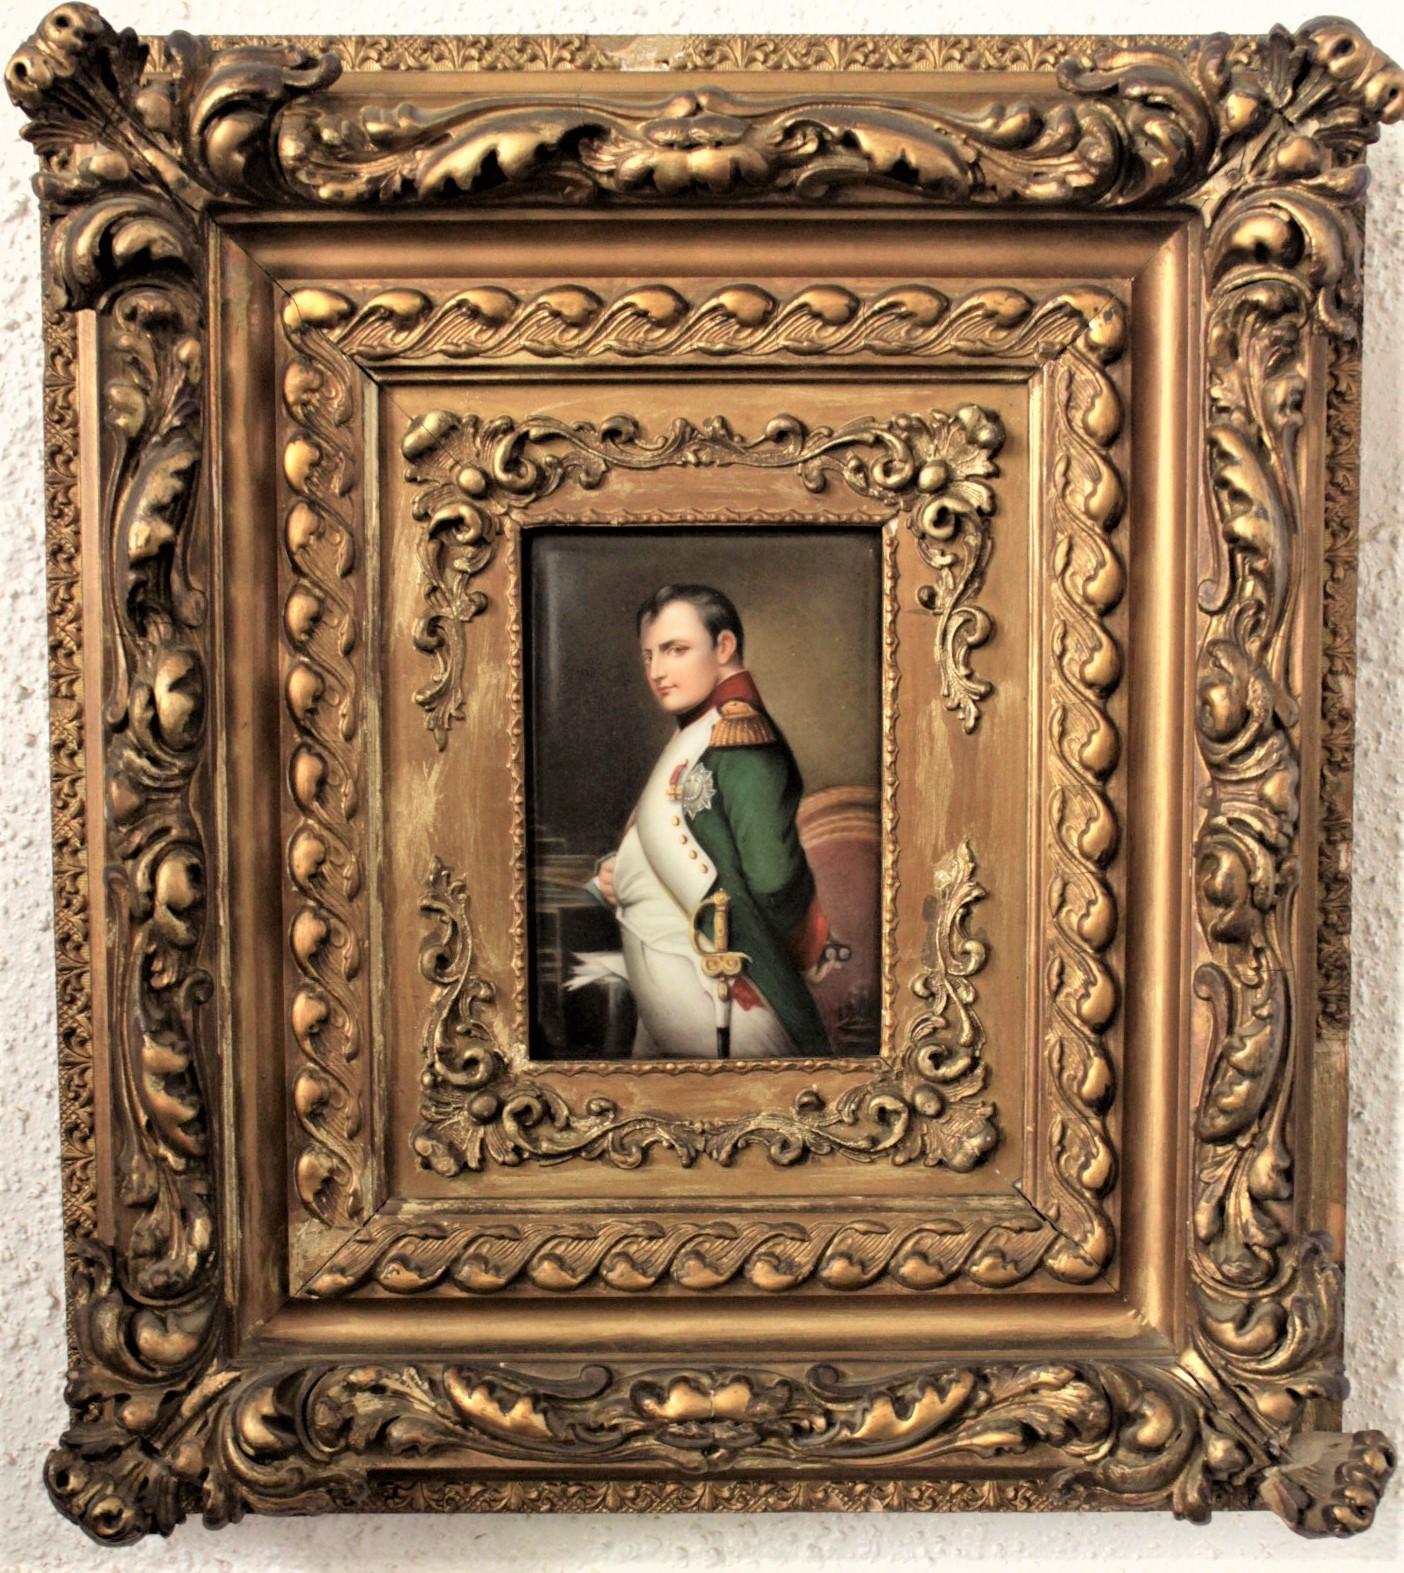 This well executed hand painted porcelain panel is unsigned, but presumed to have been done in France in approximately 1850 in a Renaissance style. The panel is an iconic depiction of Napoleon wearing his uniform. The plaque is framed in a very